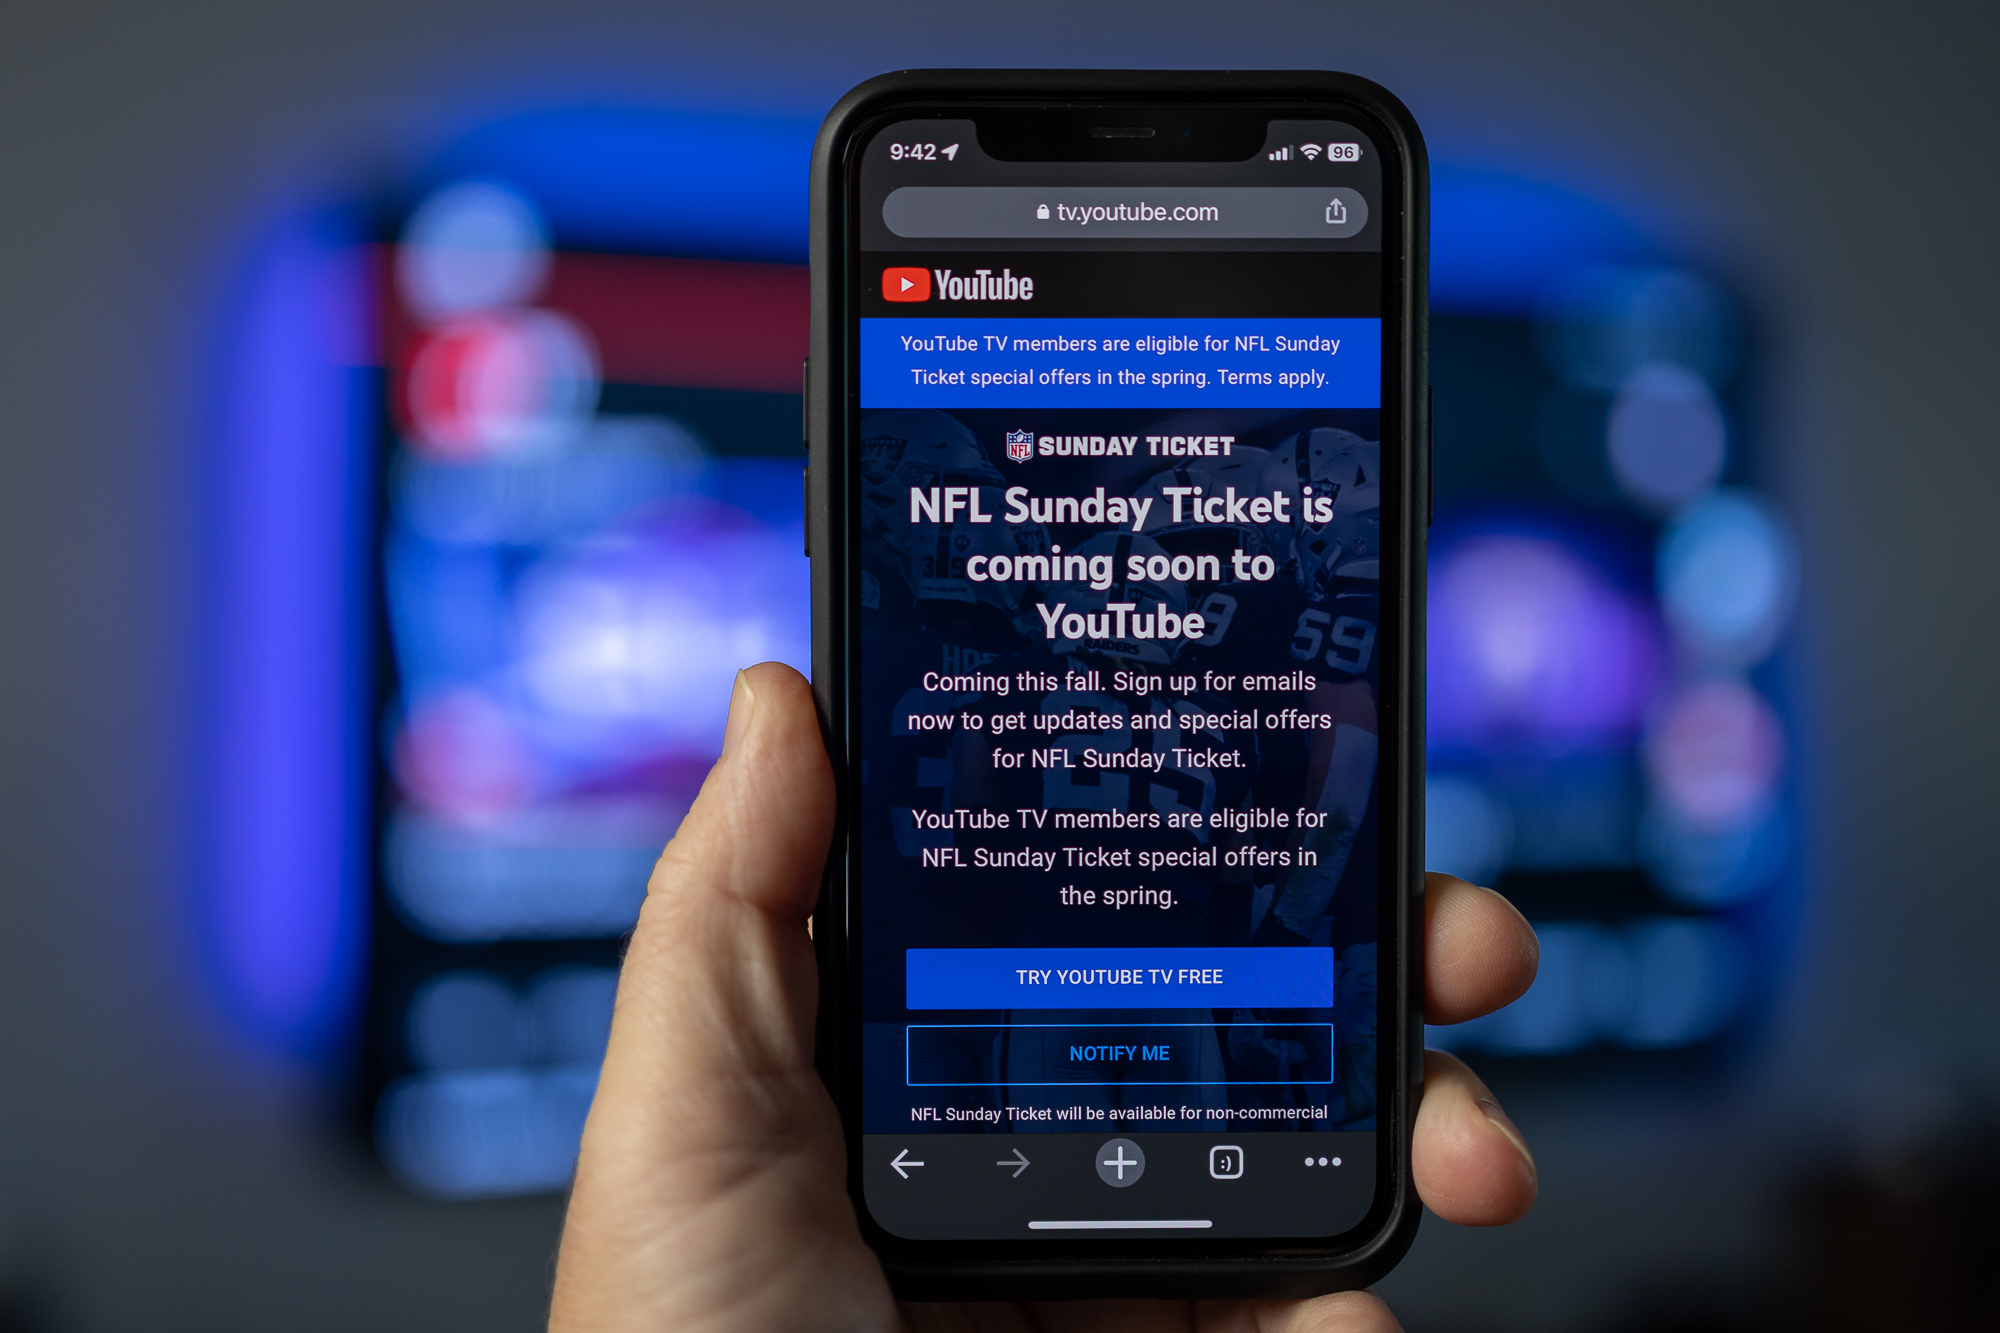 nfl ticket on youtube